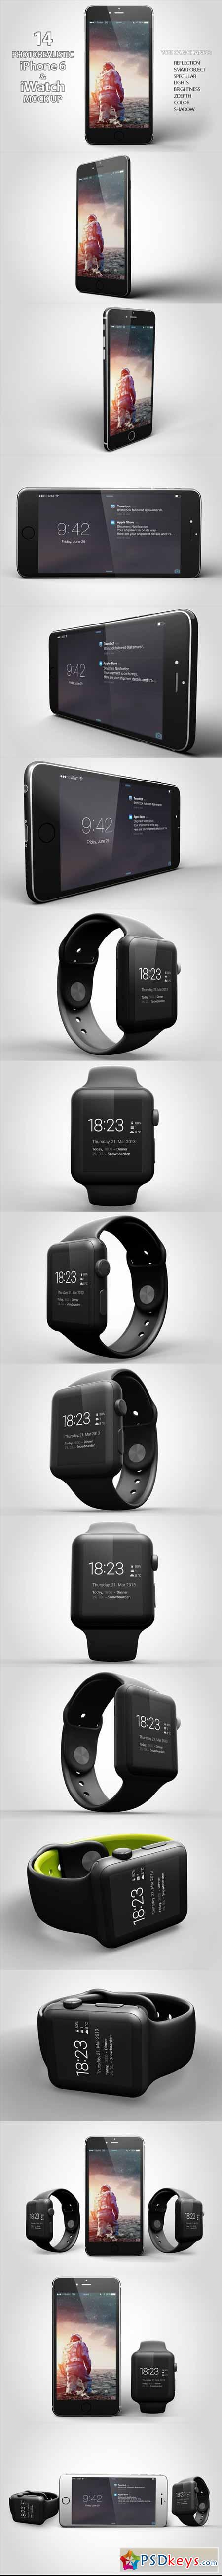 iPhone 6 & iWatch Mock Up 289721